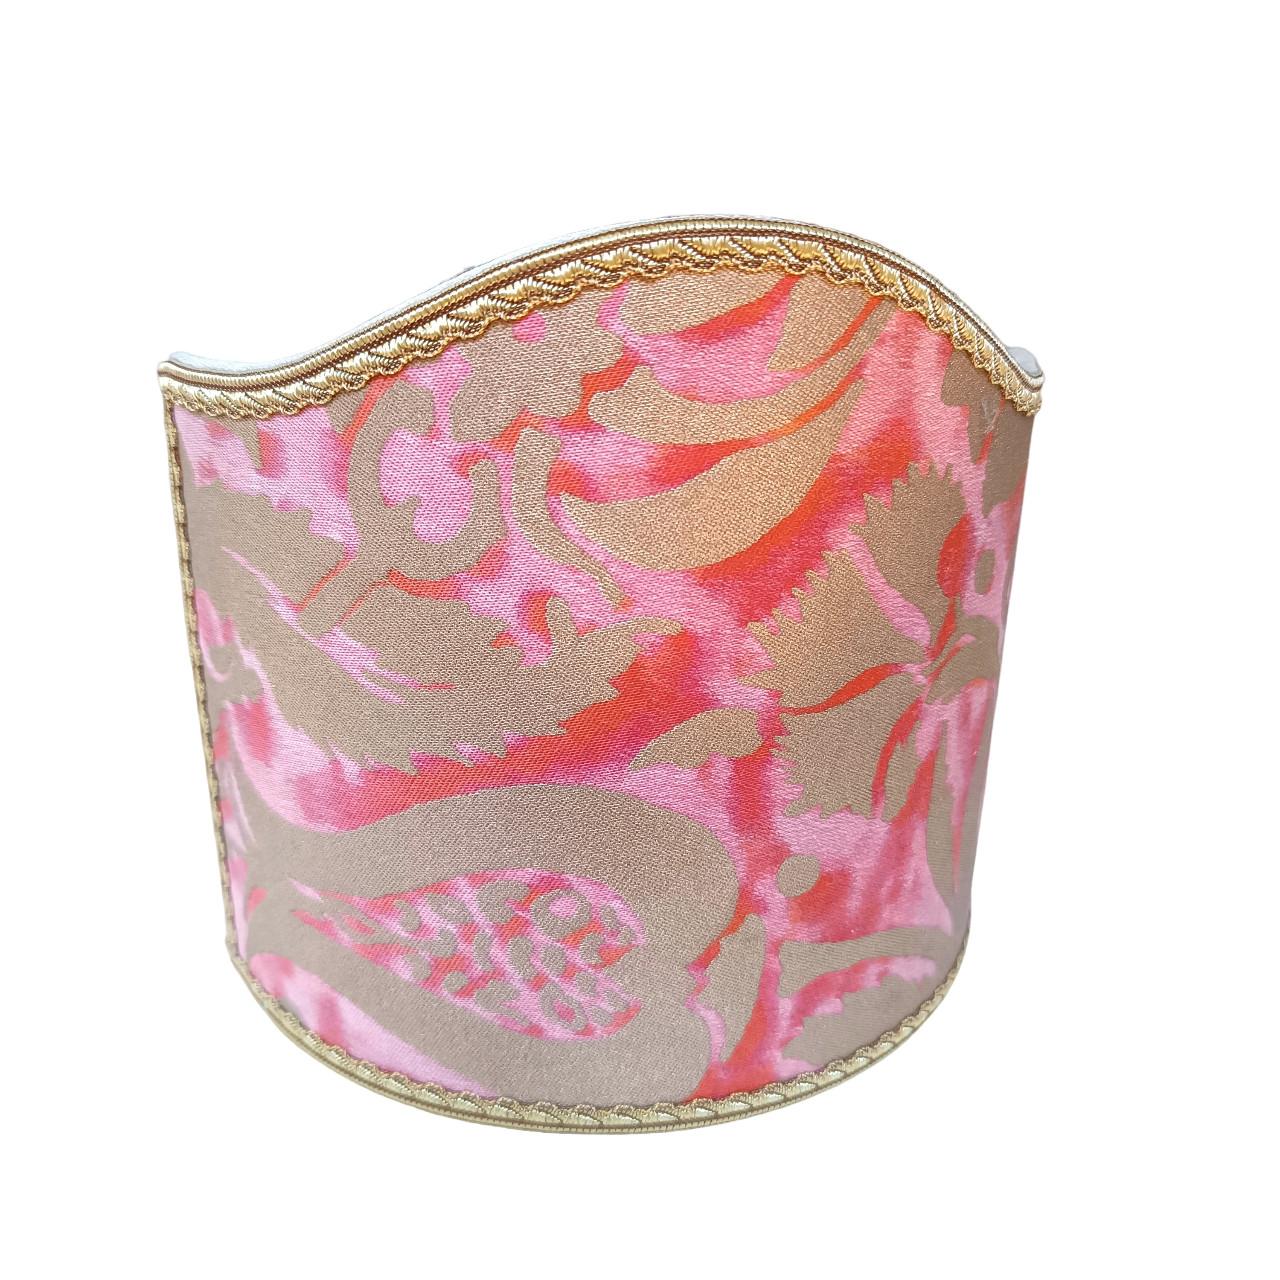 Paar Clip on Sconce Schirme Fortuny Fabric Coral Haze & Silvery Gold Pomegranate im Angebot 2